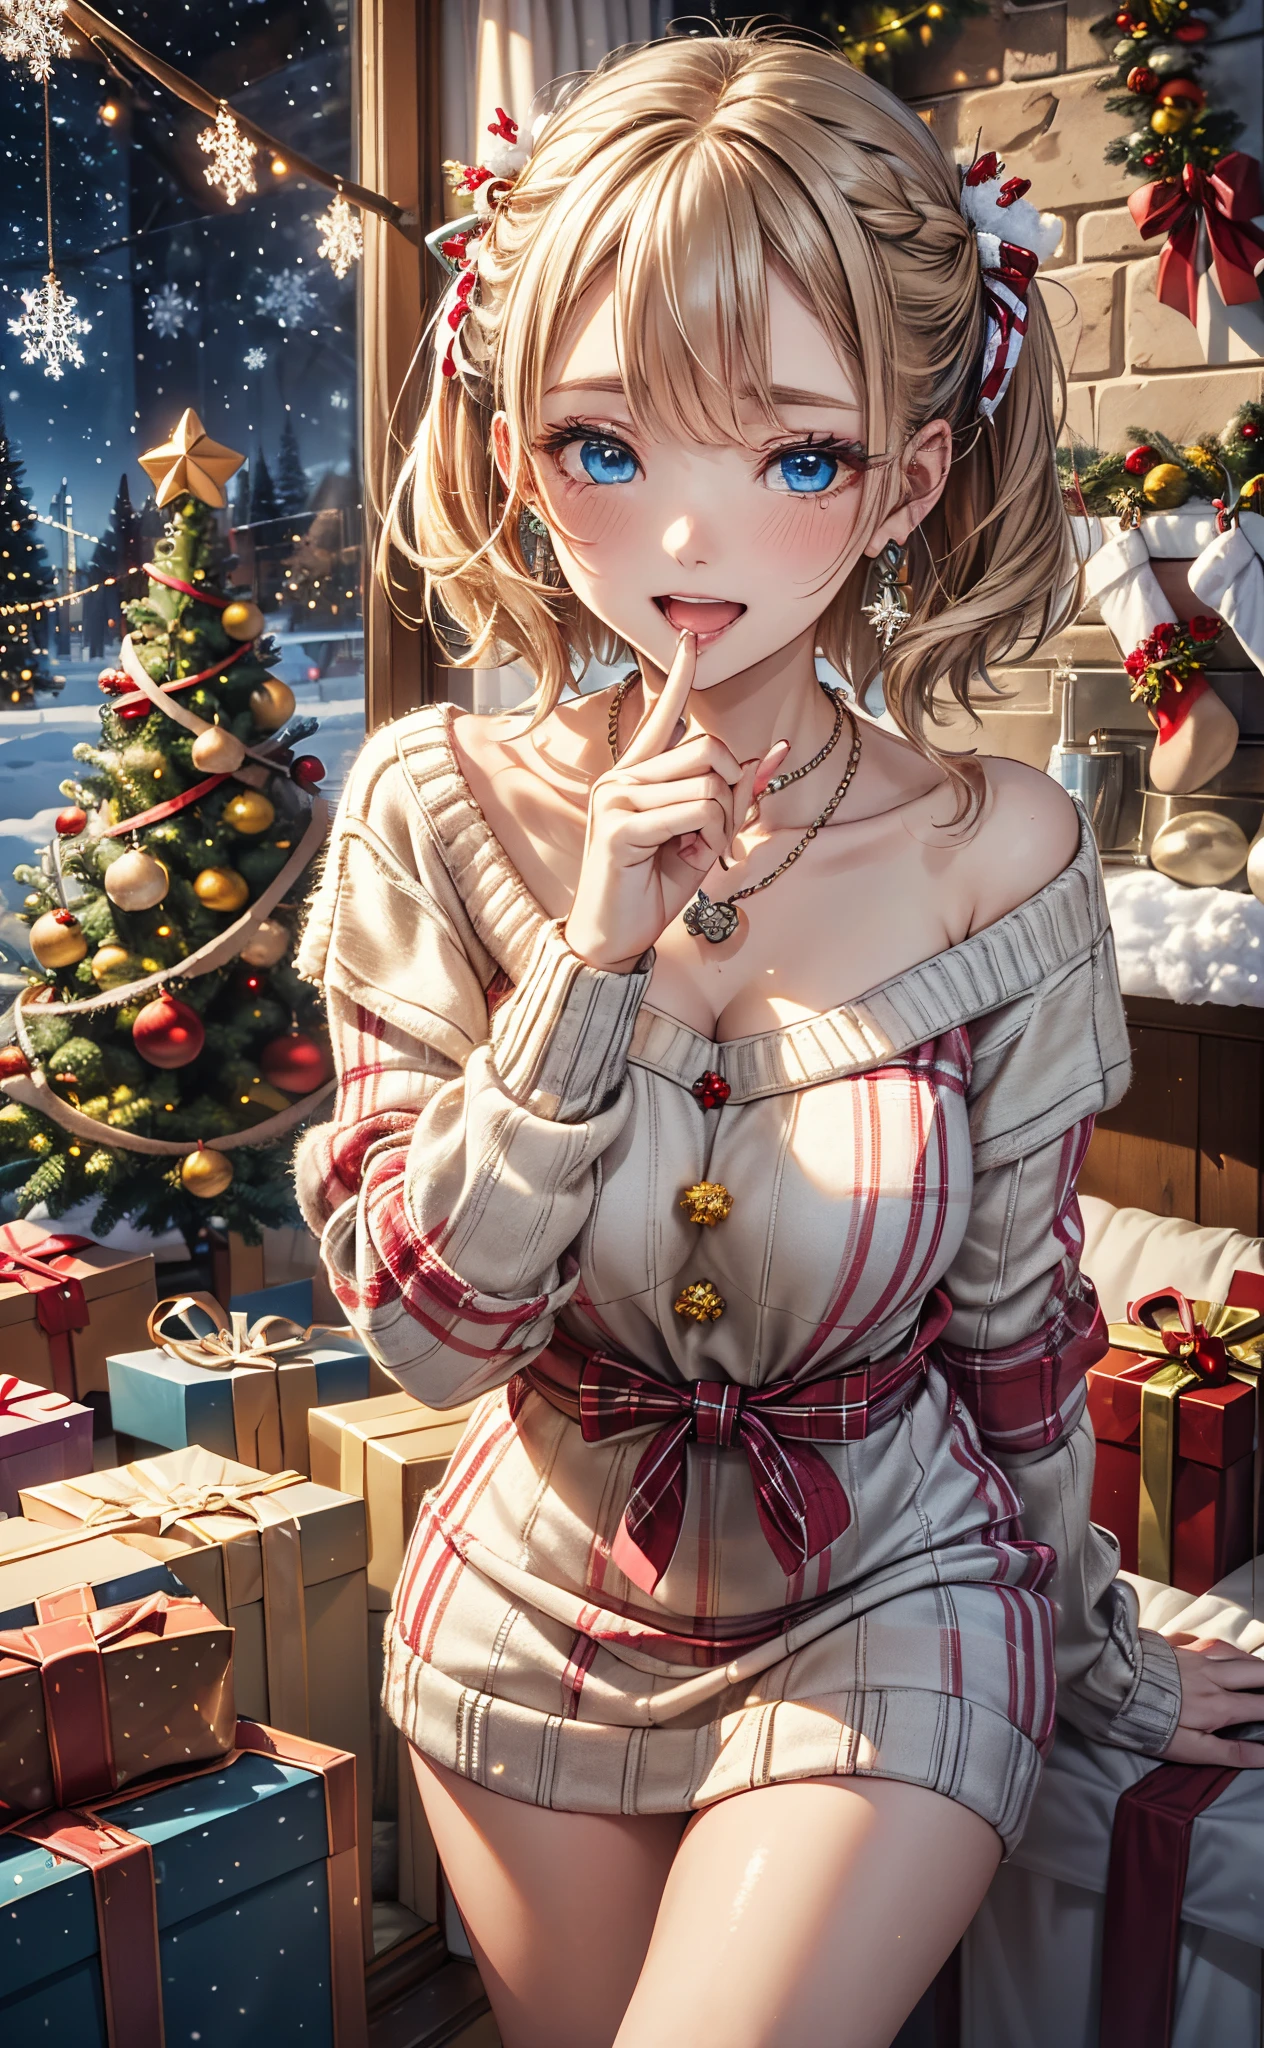 absurderes, ultra-detailliert,bright colour, Short hair,Blonde hair with fluffy short twintails:1.2) Shiny hair,(red and white plaid sweater dress:1.5),(Open mouth and laugh 1. 3),(Close one eye and feel shy:1.3),(Christmas tree:1.3),(Christmas Decorations:1.3),(colorful led lights on the wall:1.5),Delicate beautiful face, red blush、(Deep Blue Eyes:1.5), White skin, hair clips, earrings, a necklace,Heavy snow outside the window,You can also see the starry sky and the aurora borealis.......